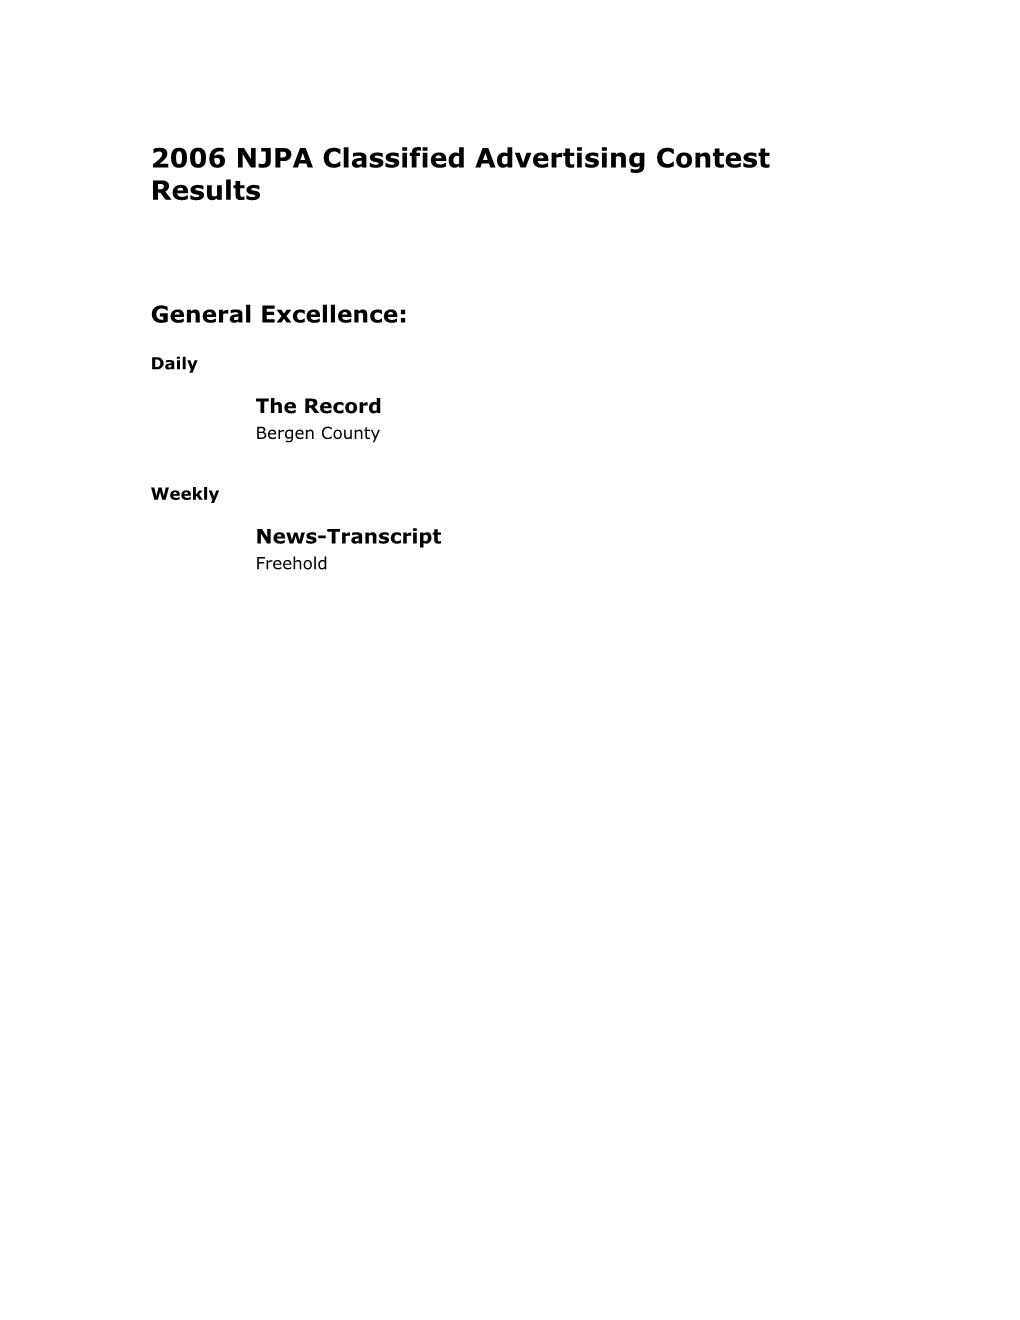 Classified Advertising Contest Results